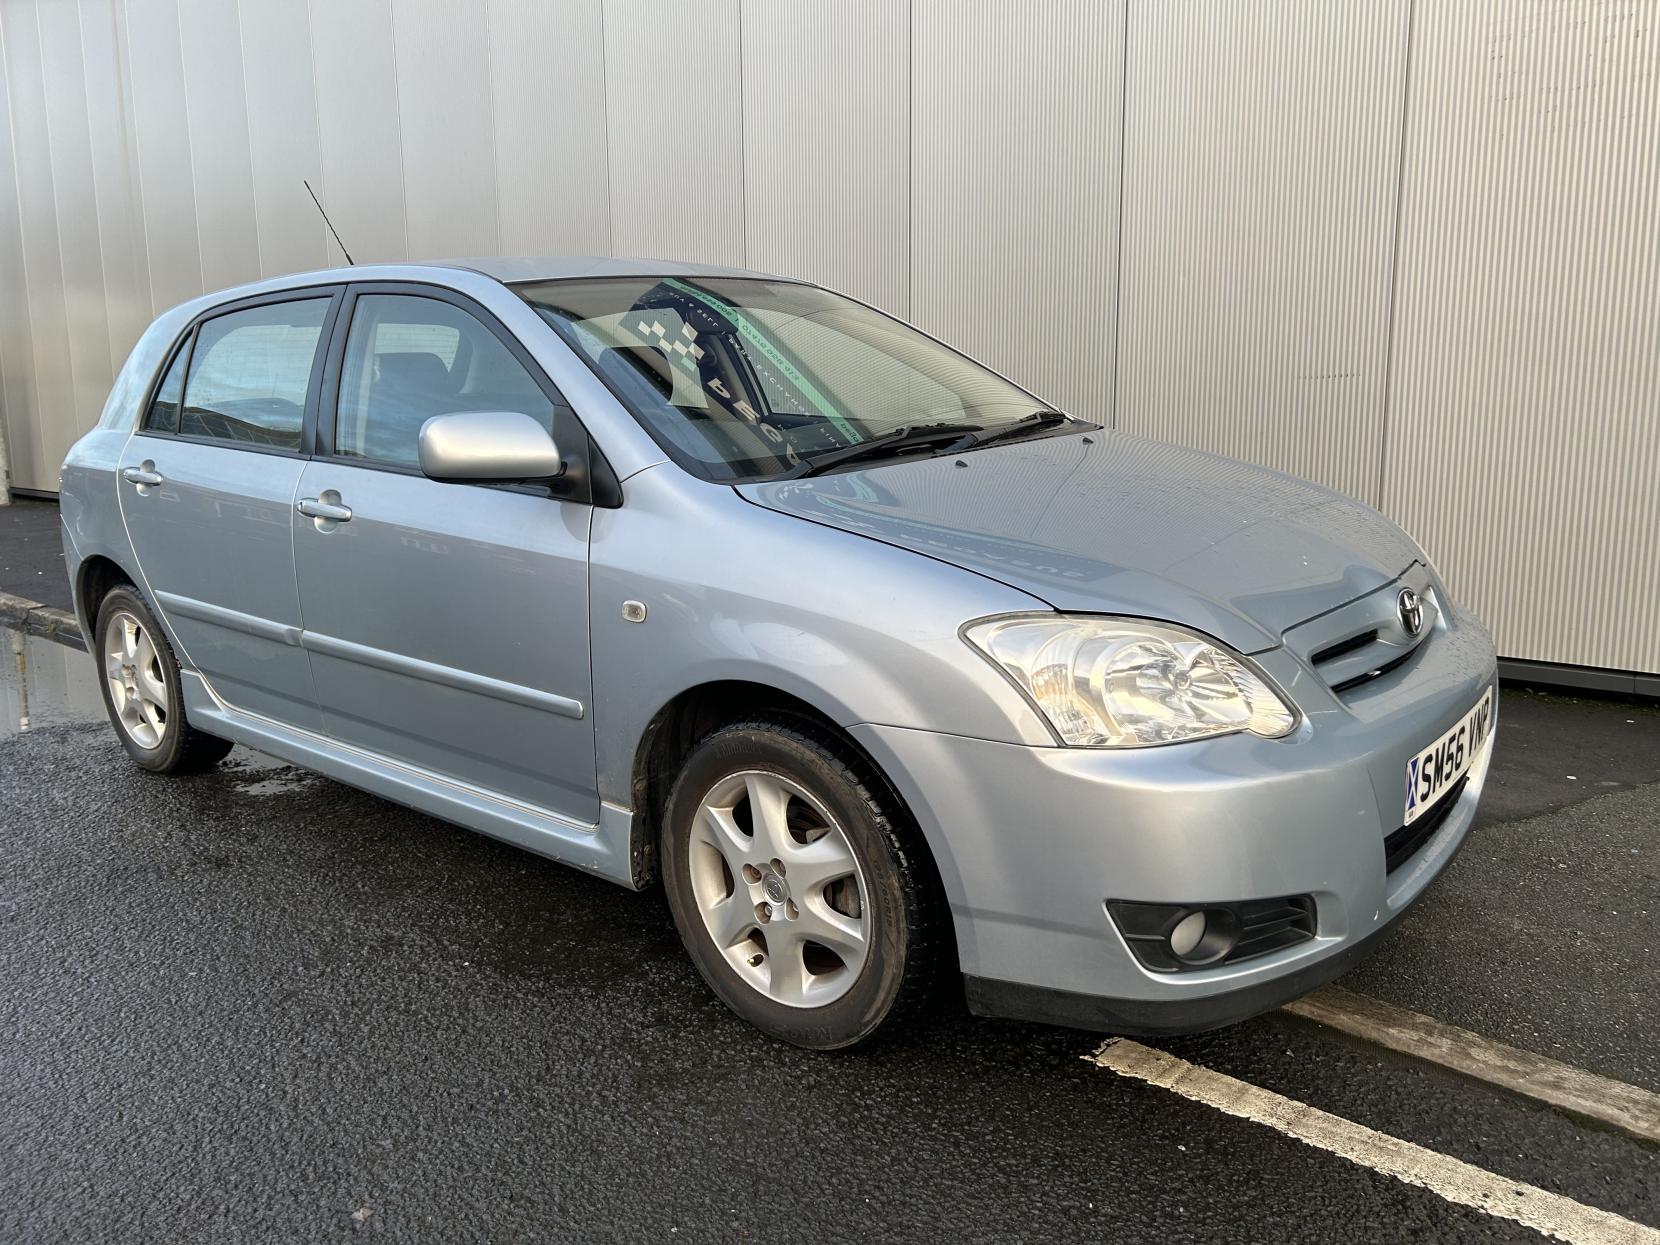 Toyota Corolla 1.4 VVT-i Colour Collection Hatchback 5dr Petrol Manual (159 g/km, 95 bhp)